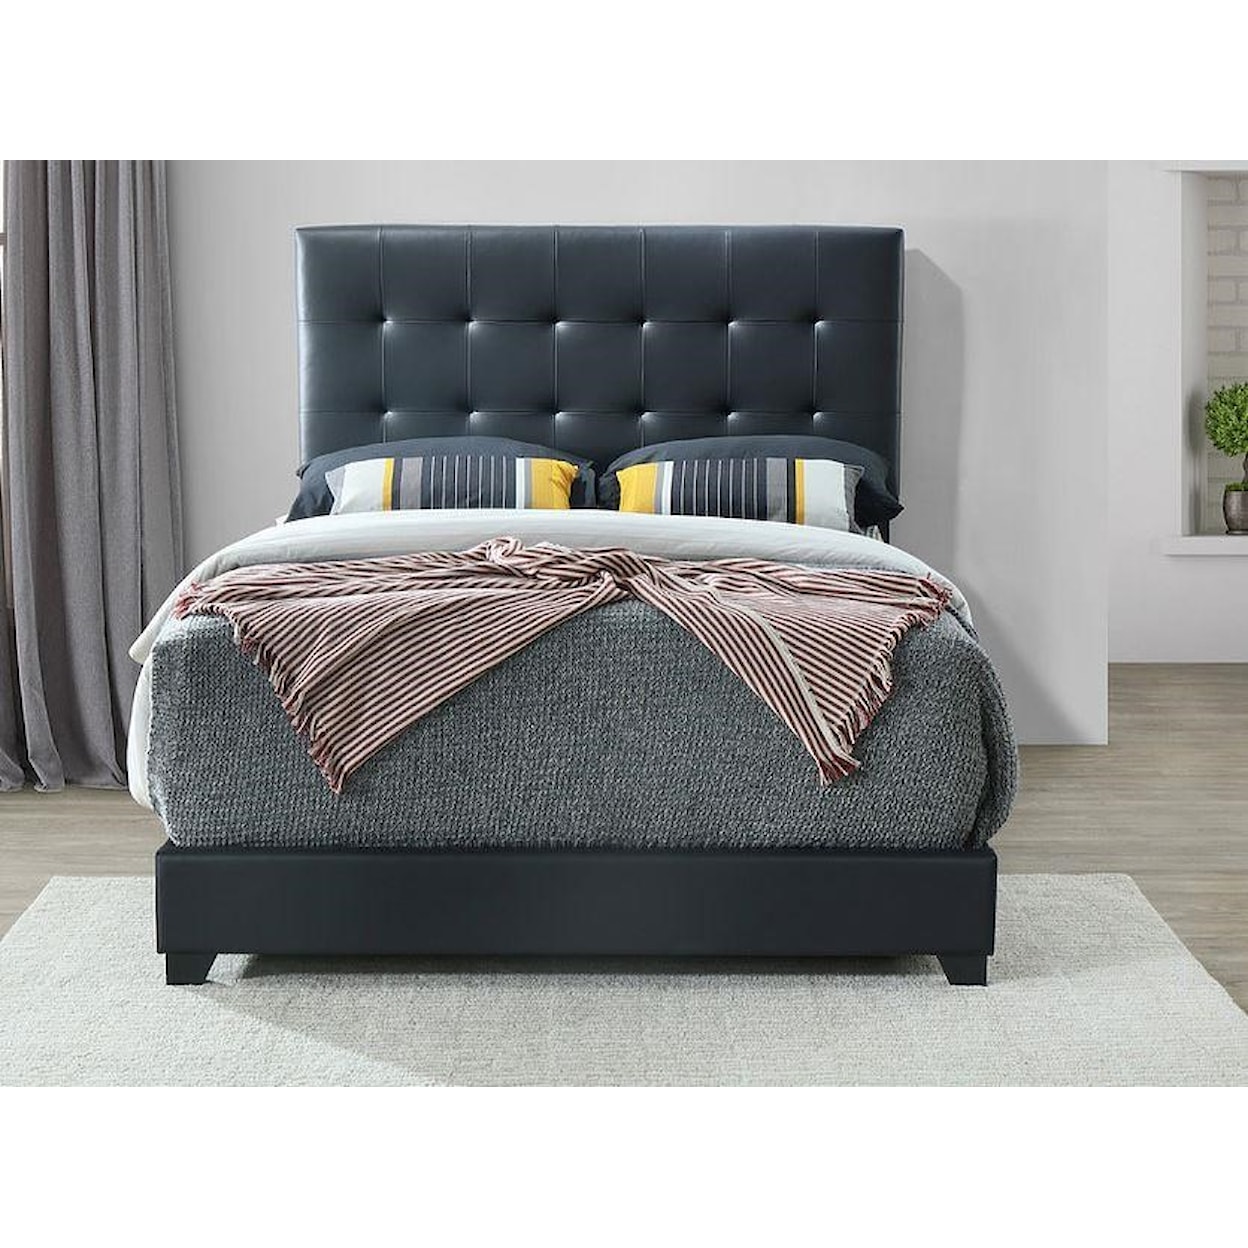 Lacey Furniture 5305 Upholstered Bed